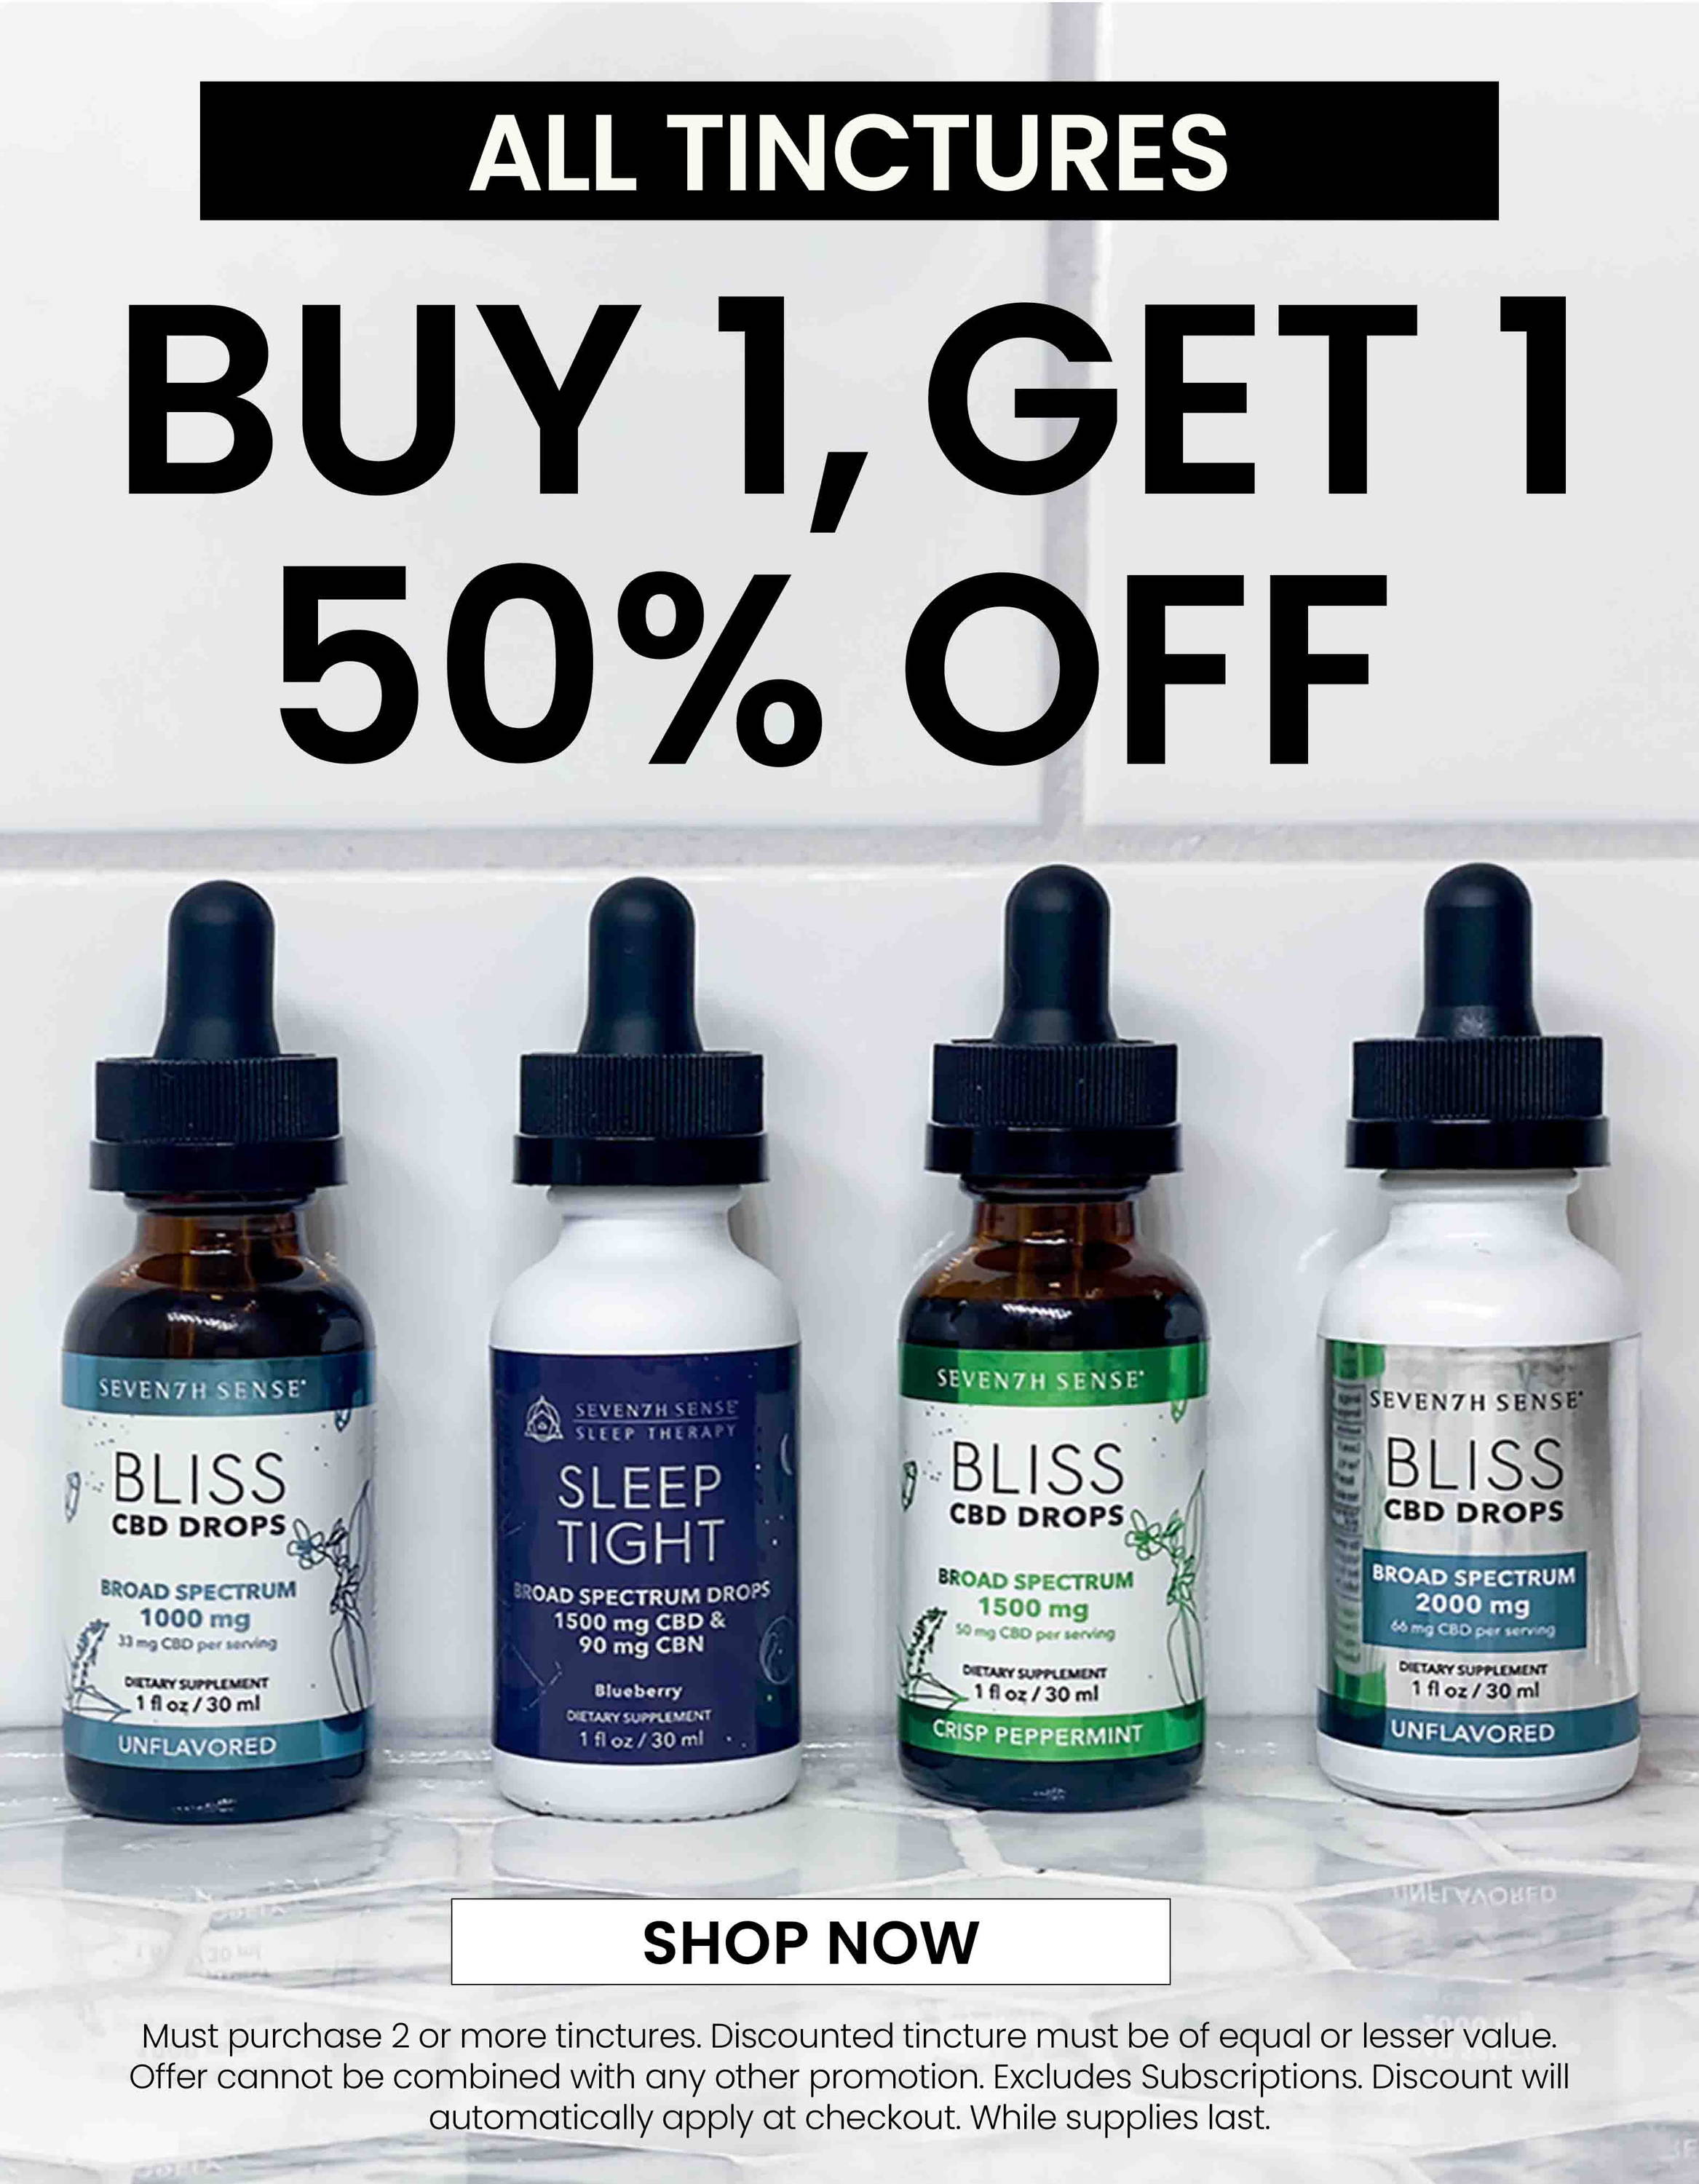 All Tinctures: Buy 1, Get 1 50% Off. Shop Now.